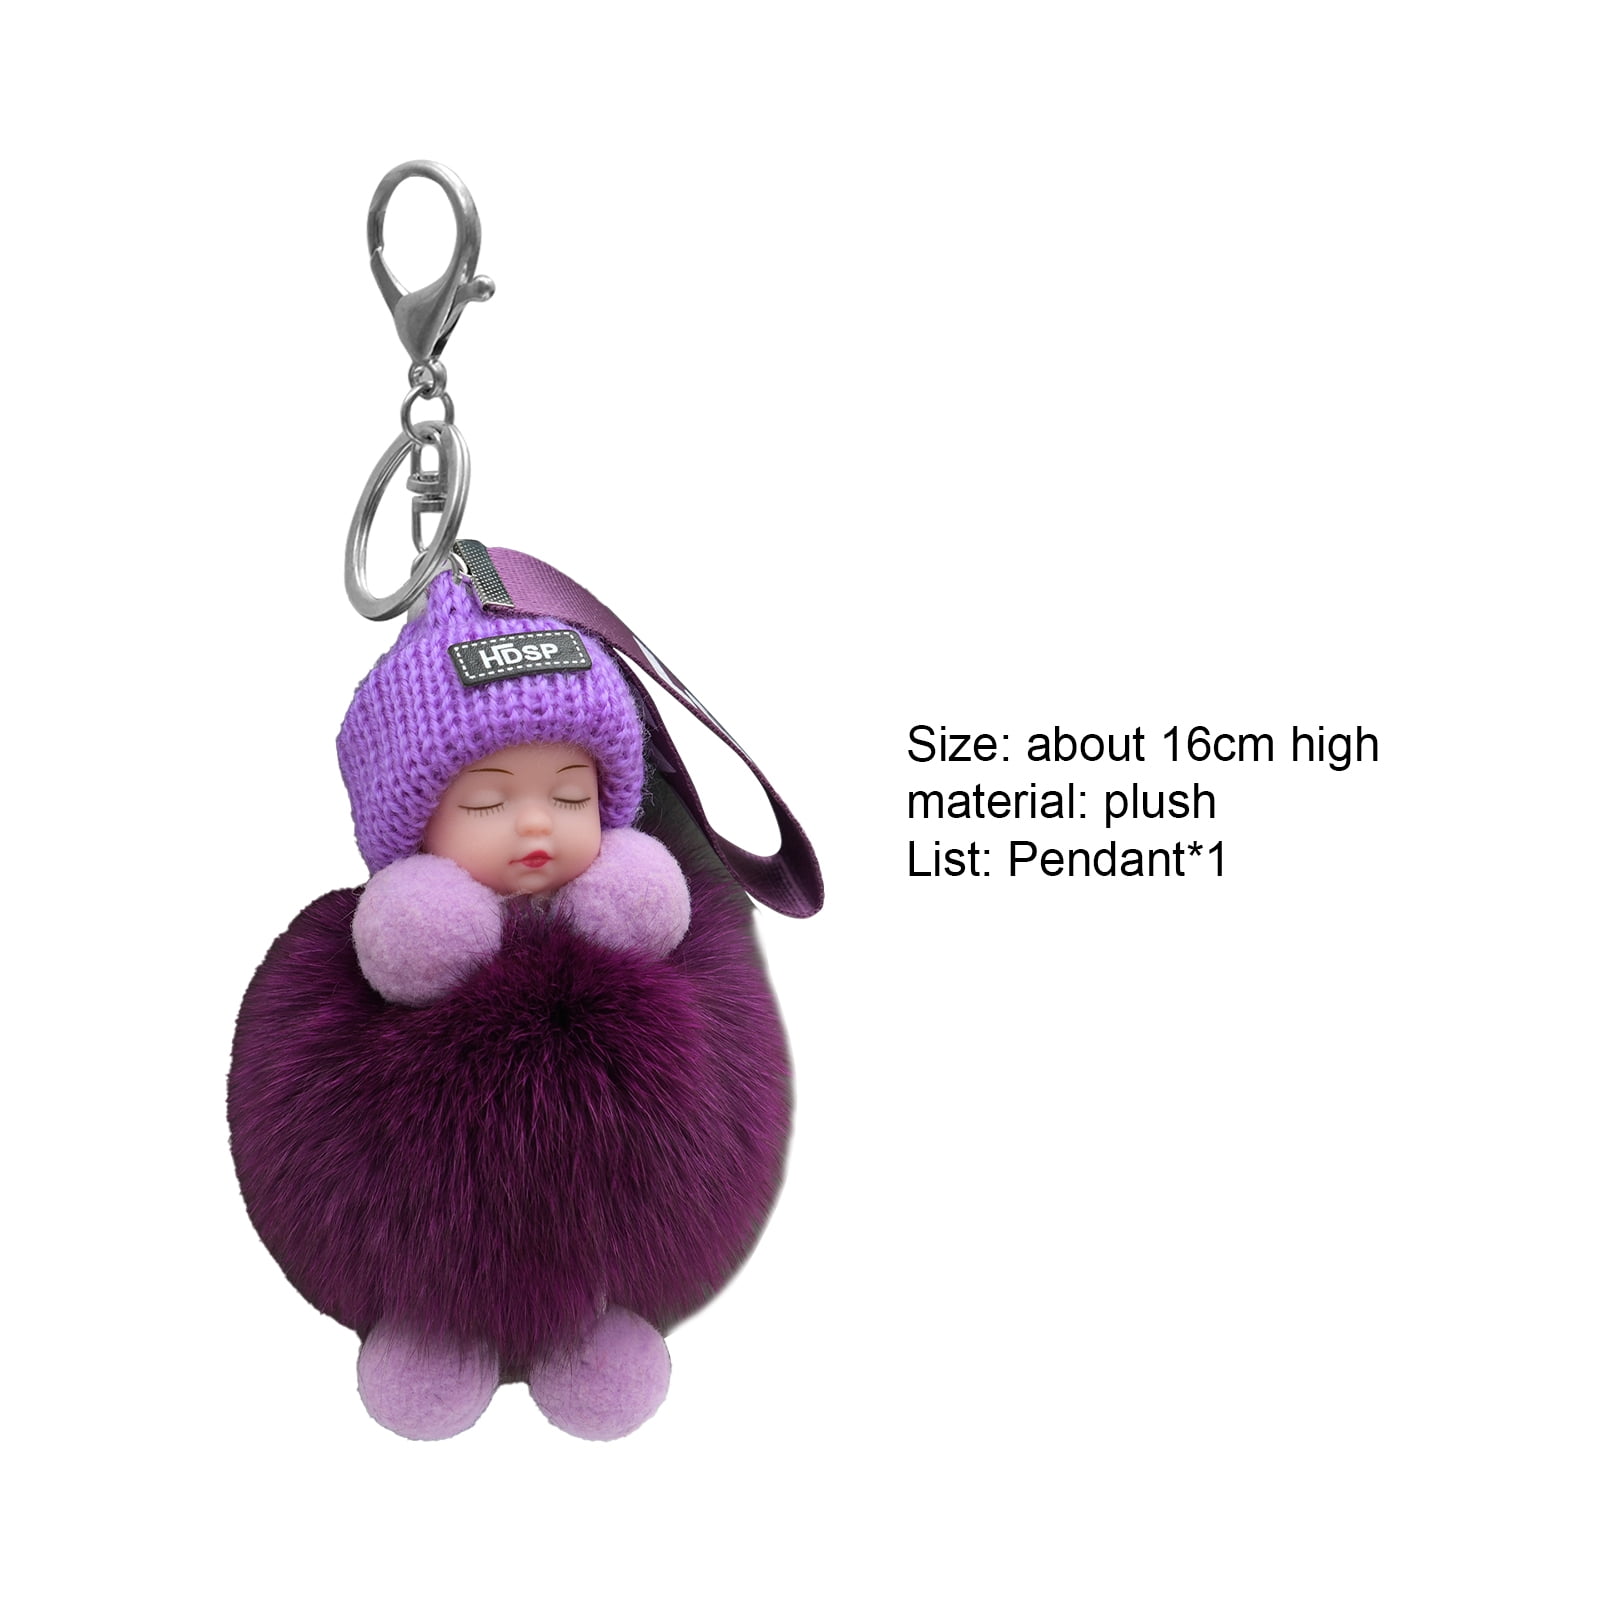 home cute small soft touch pom pom fluffy sleeping baby doll keychain/key  pendant ornaments /hangign key ring for bag accessories ki chain